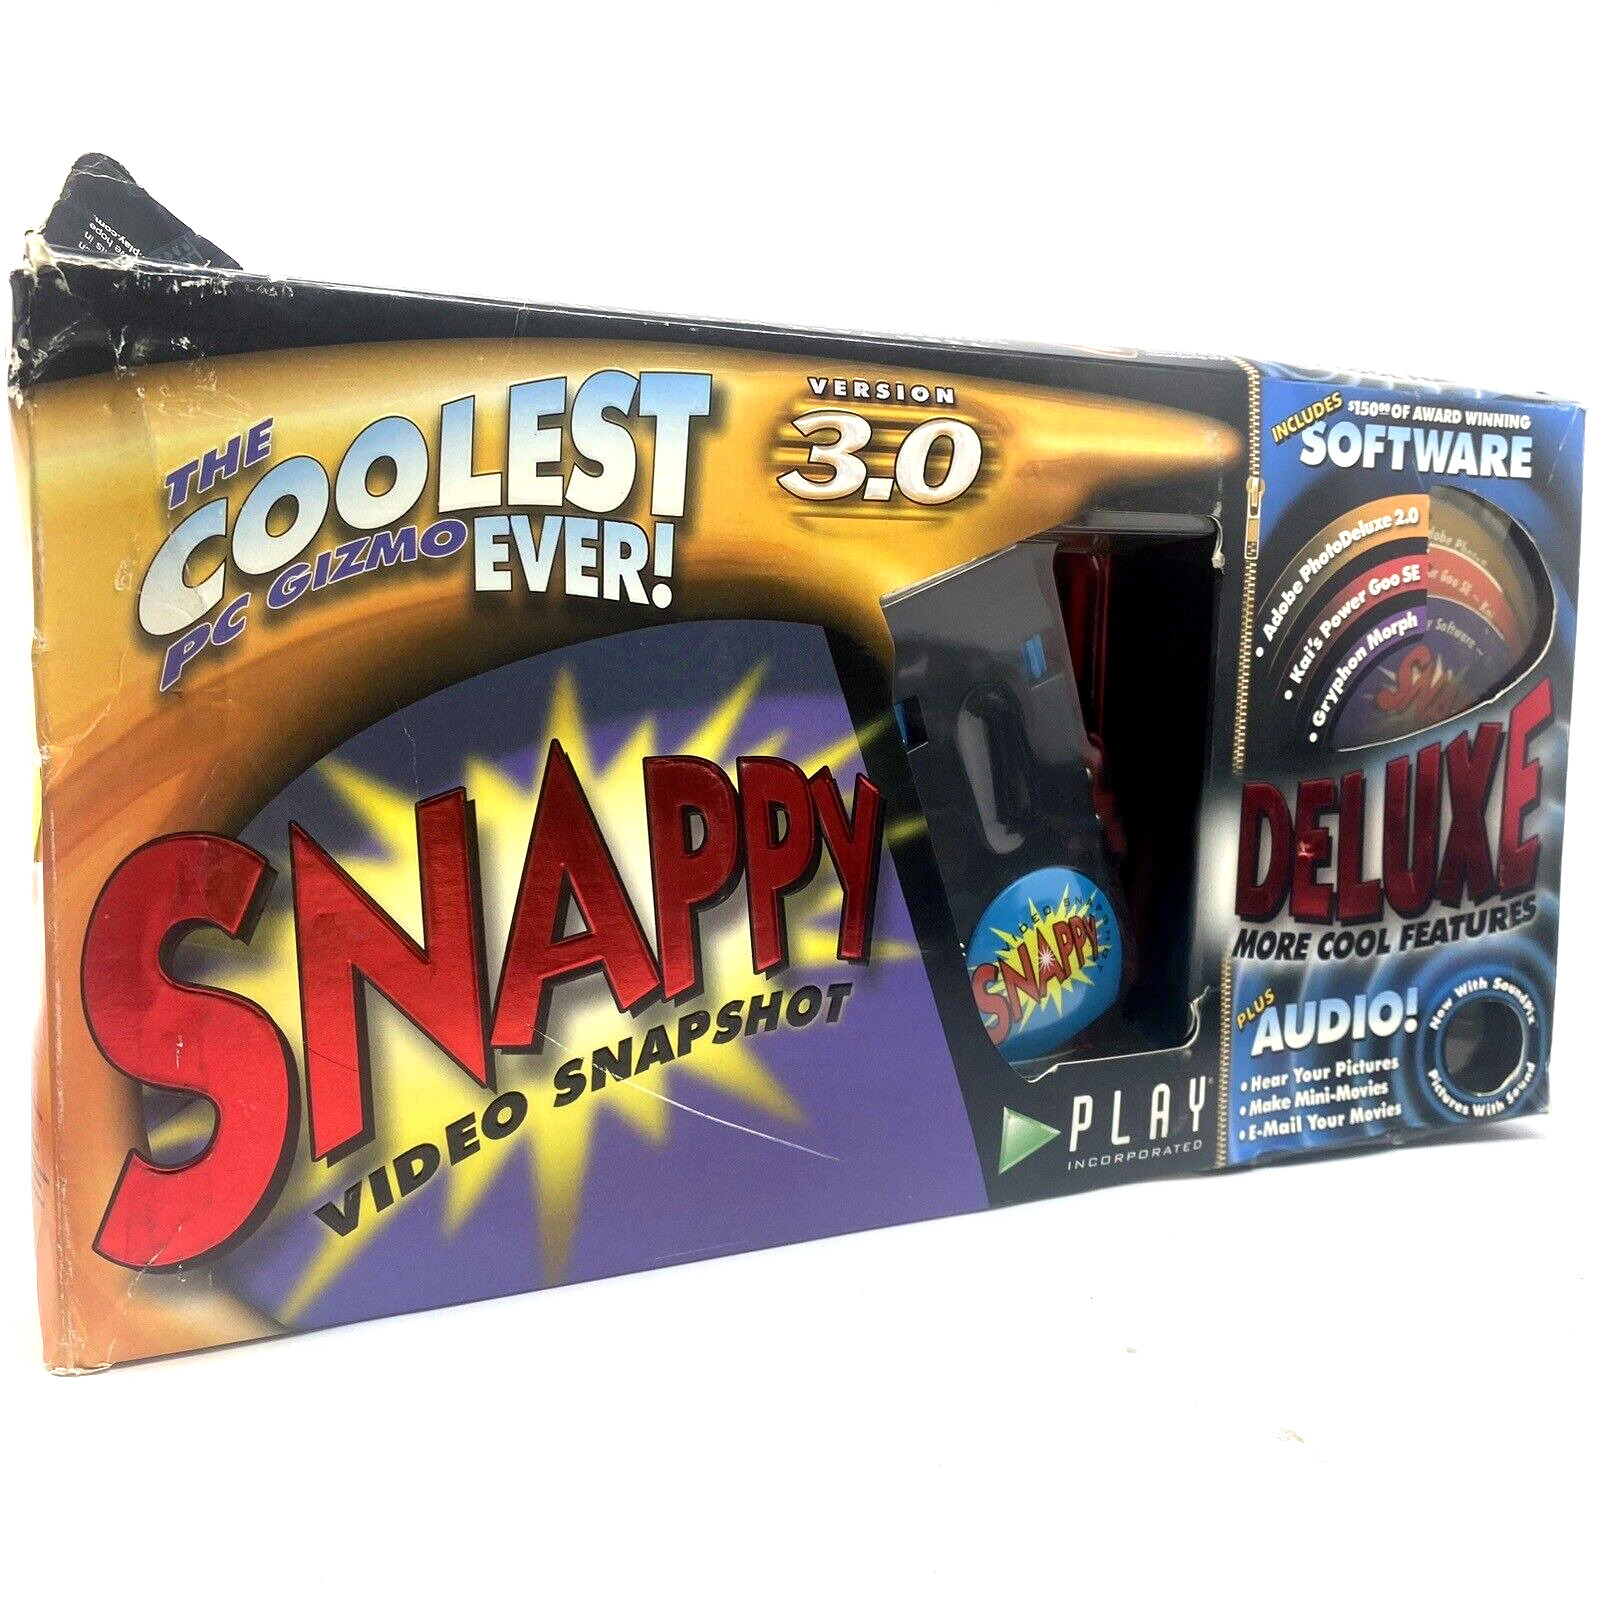 Vintage Snappy Video Snapshot Version 3.0 Deluxe with Software Plus Video